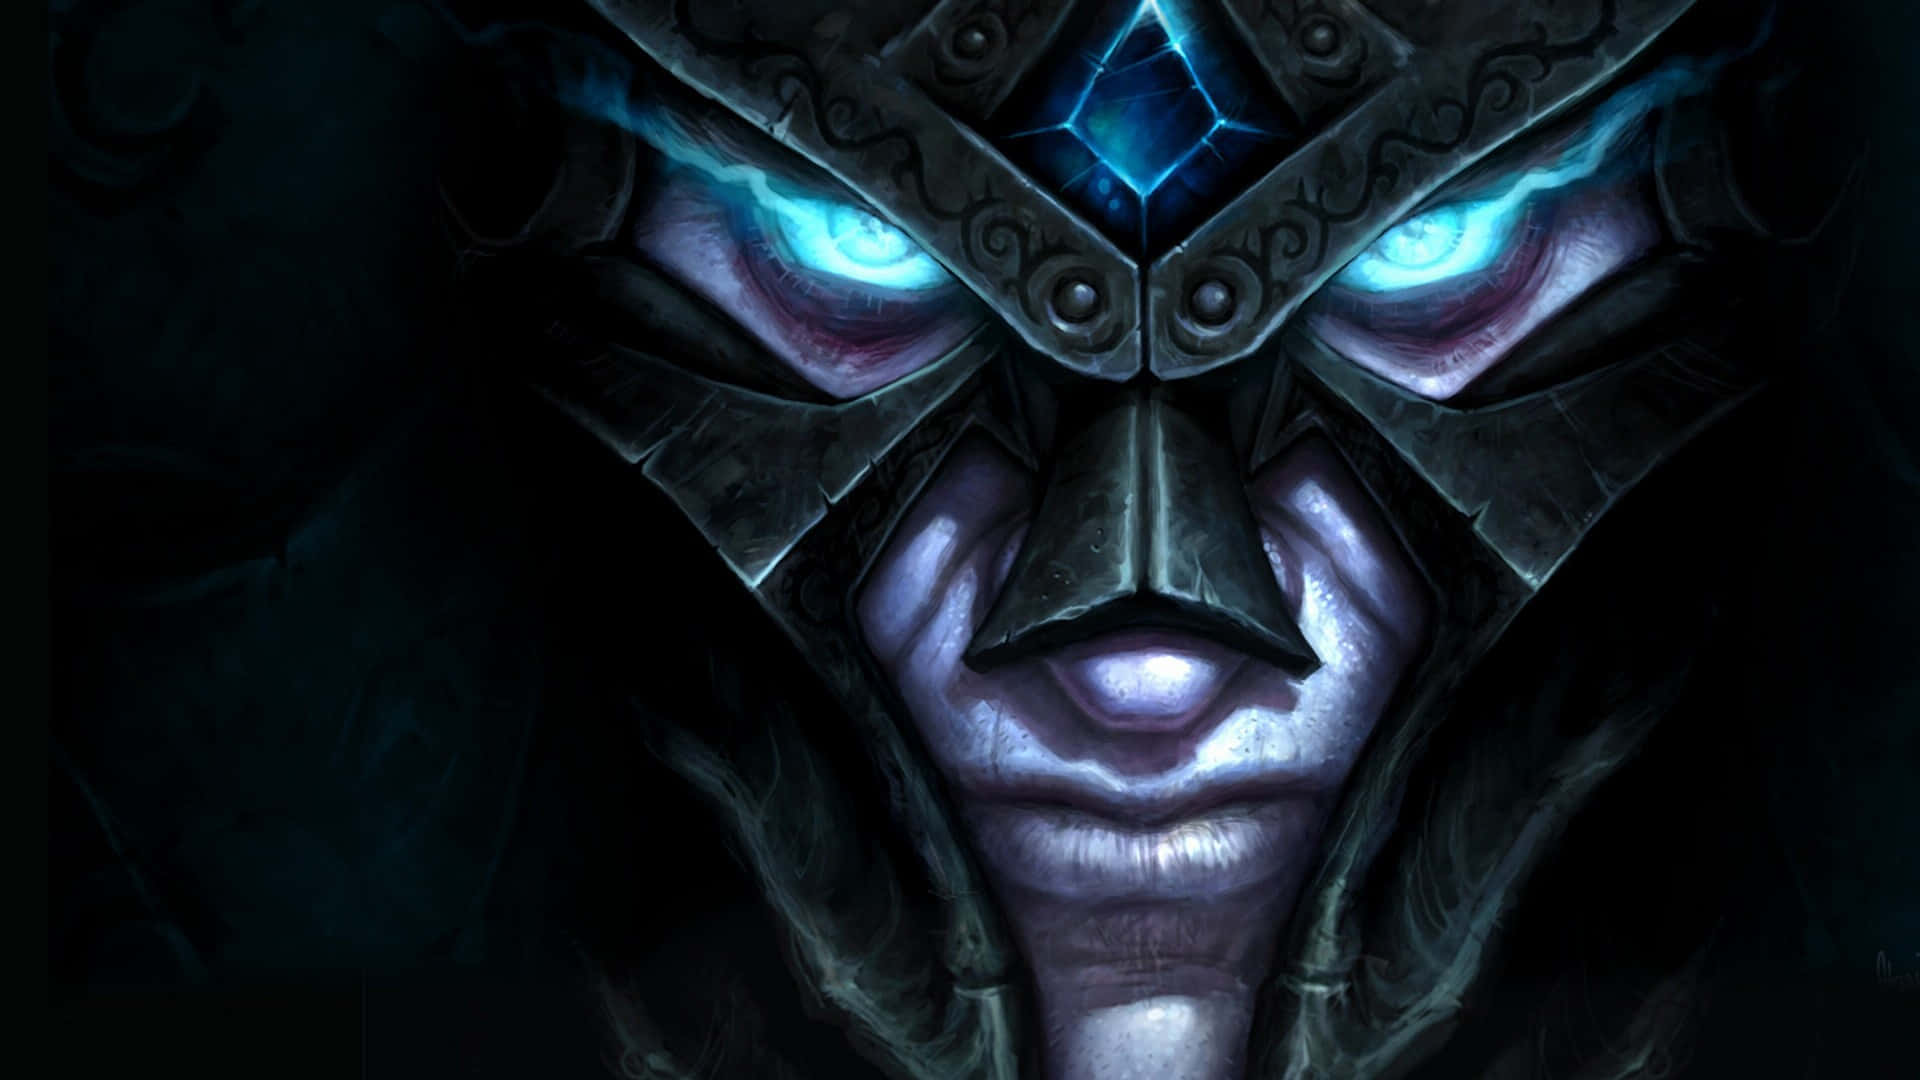 Warcraft2 Arthas Fierce Would Be Translated To Spanish As 